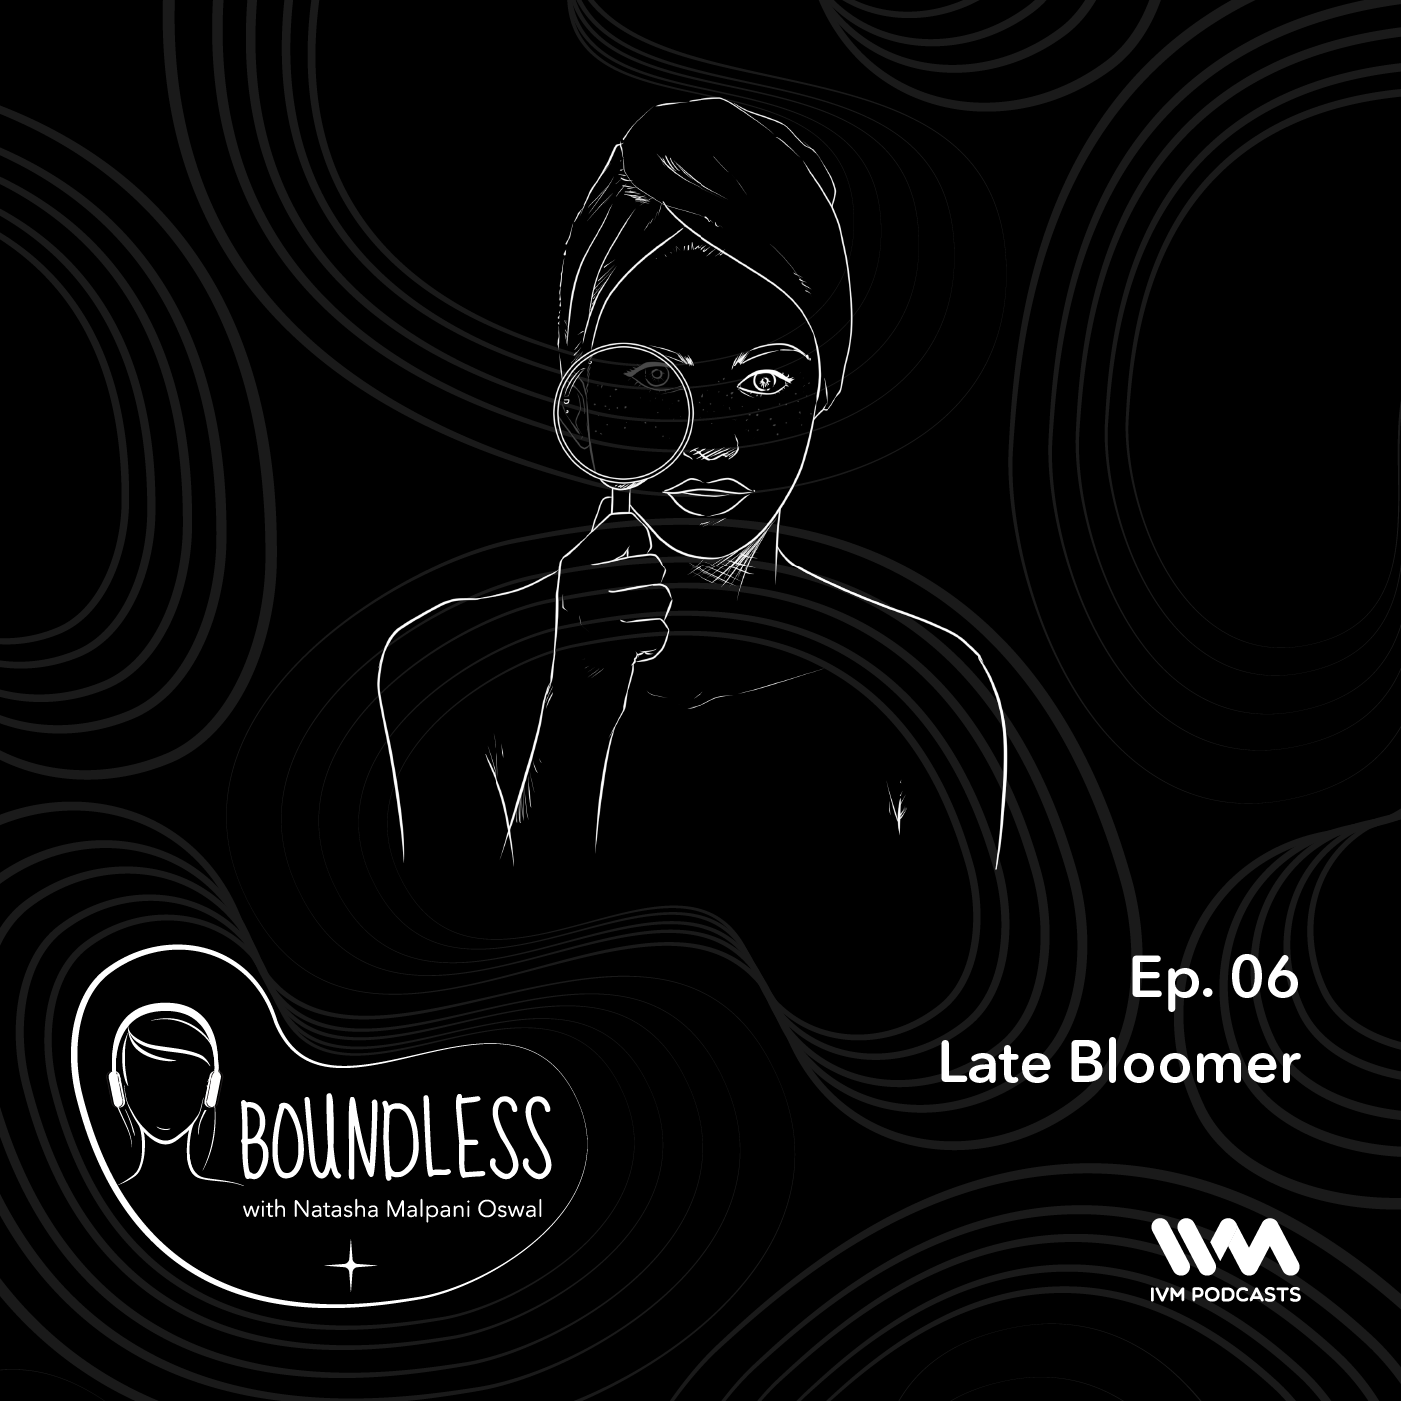 Ep. 06: Late Bloomer